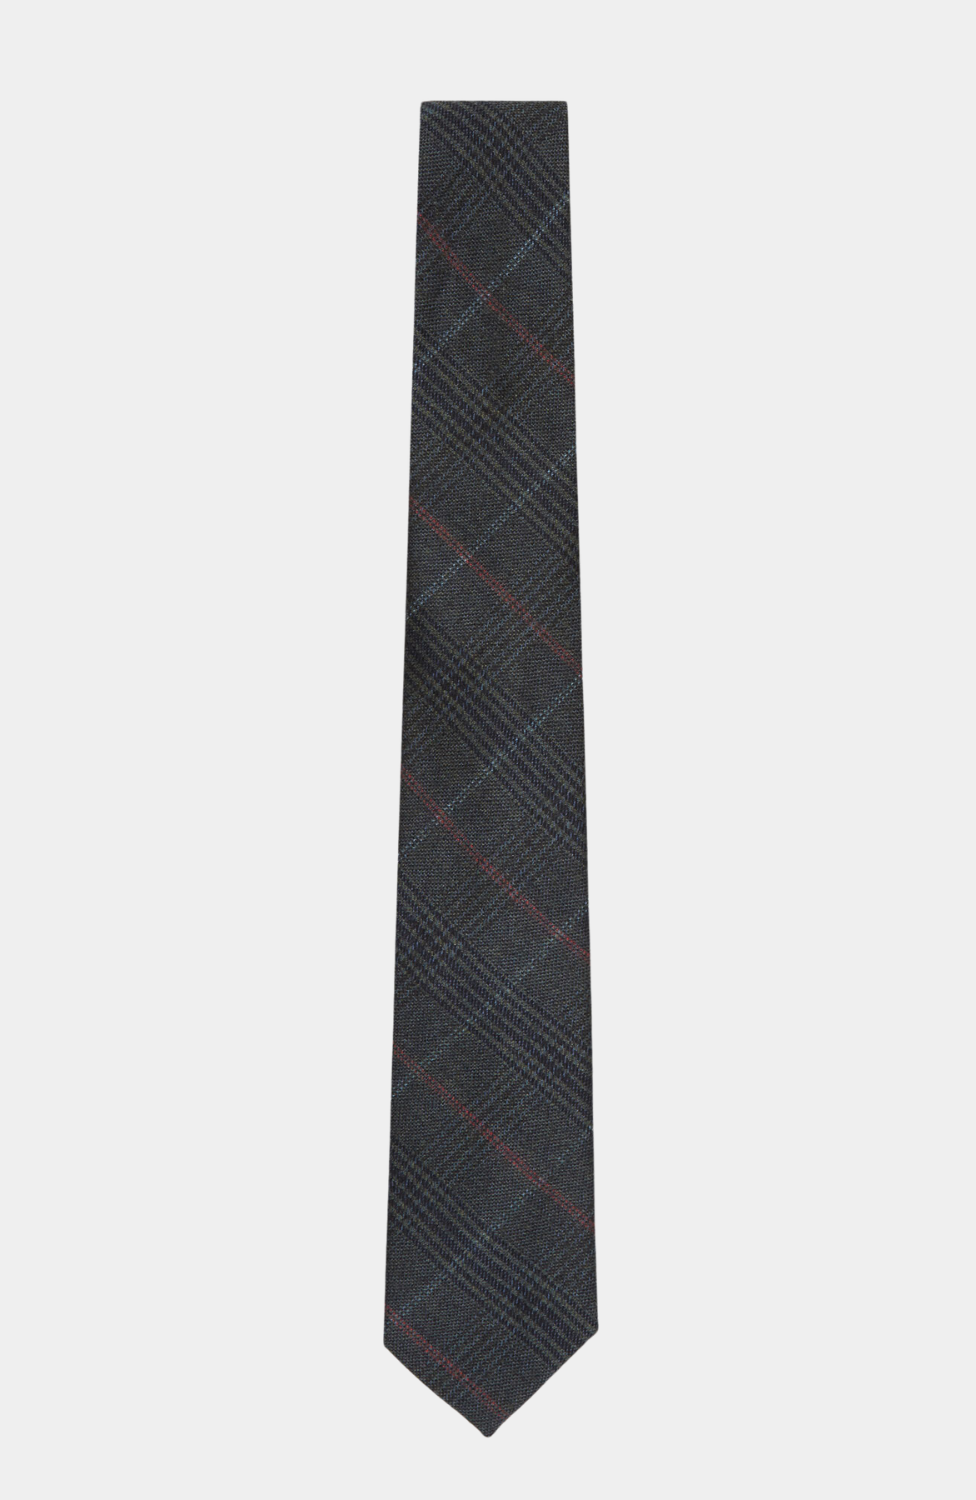 ANGLESEY TIE - HIRE